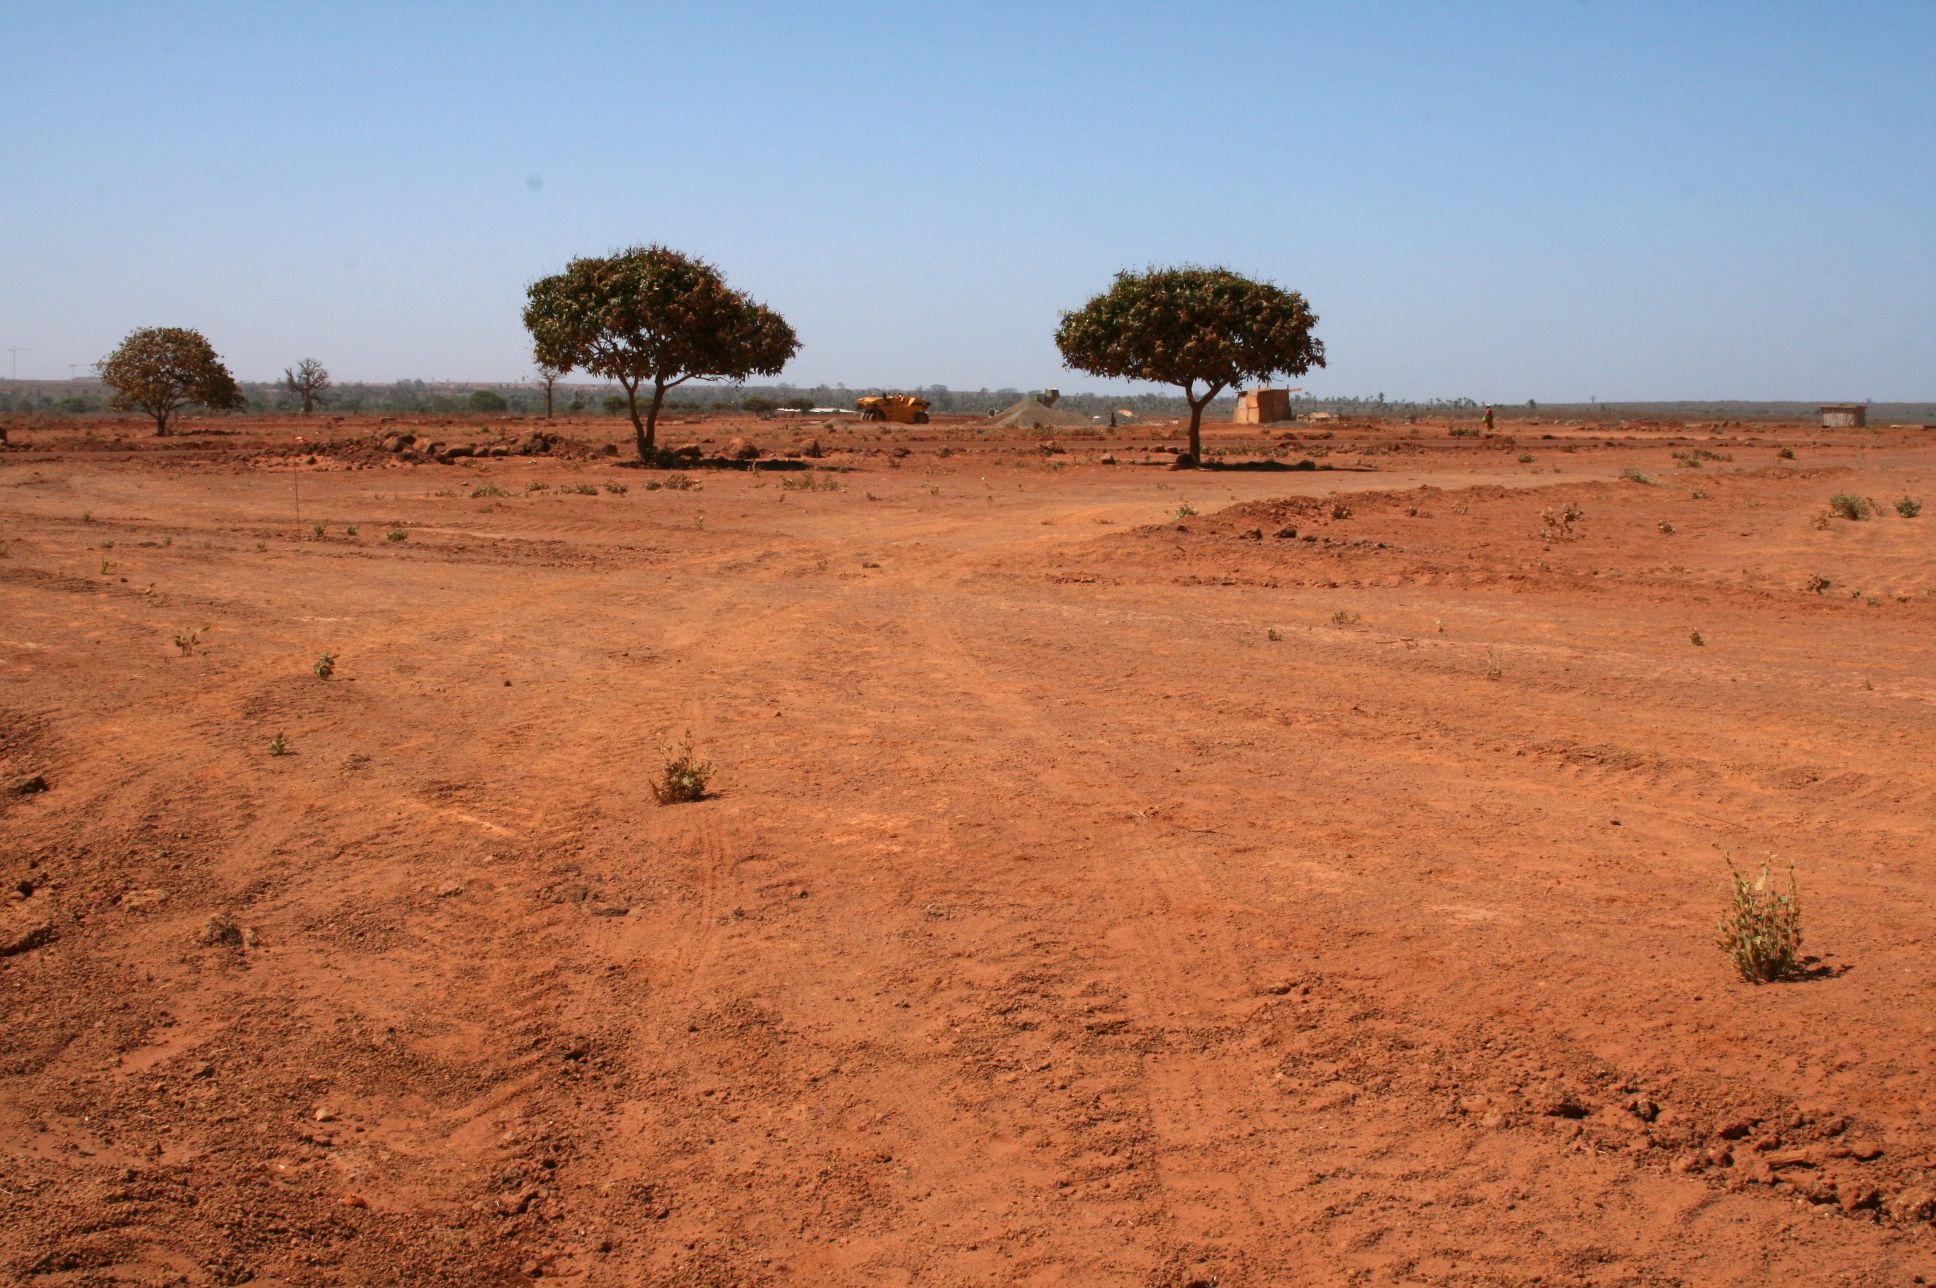  On the outskirts&nbsp;of Dakar, vegetable fields have been cleared to make way for the capital’s&nbsp;new airport. 